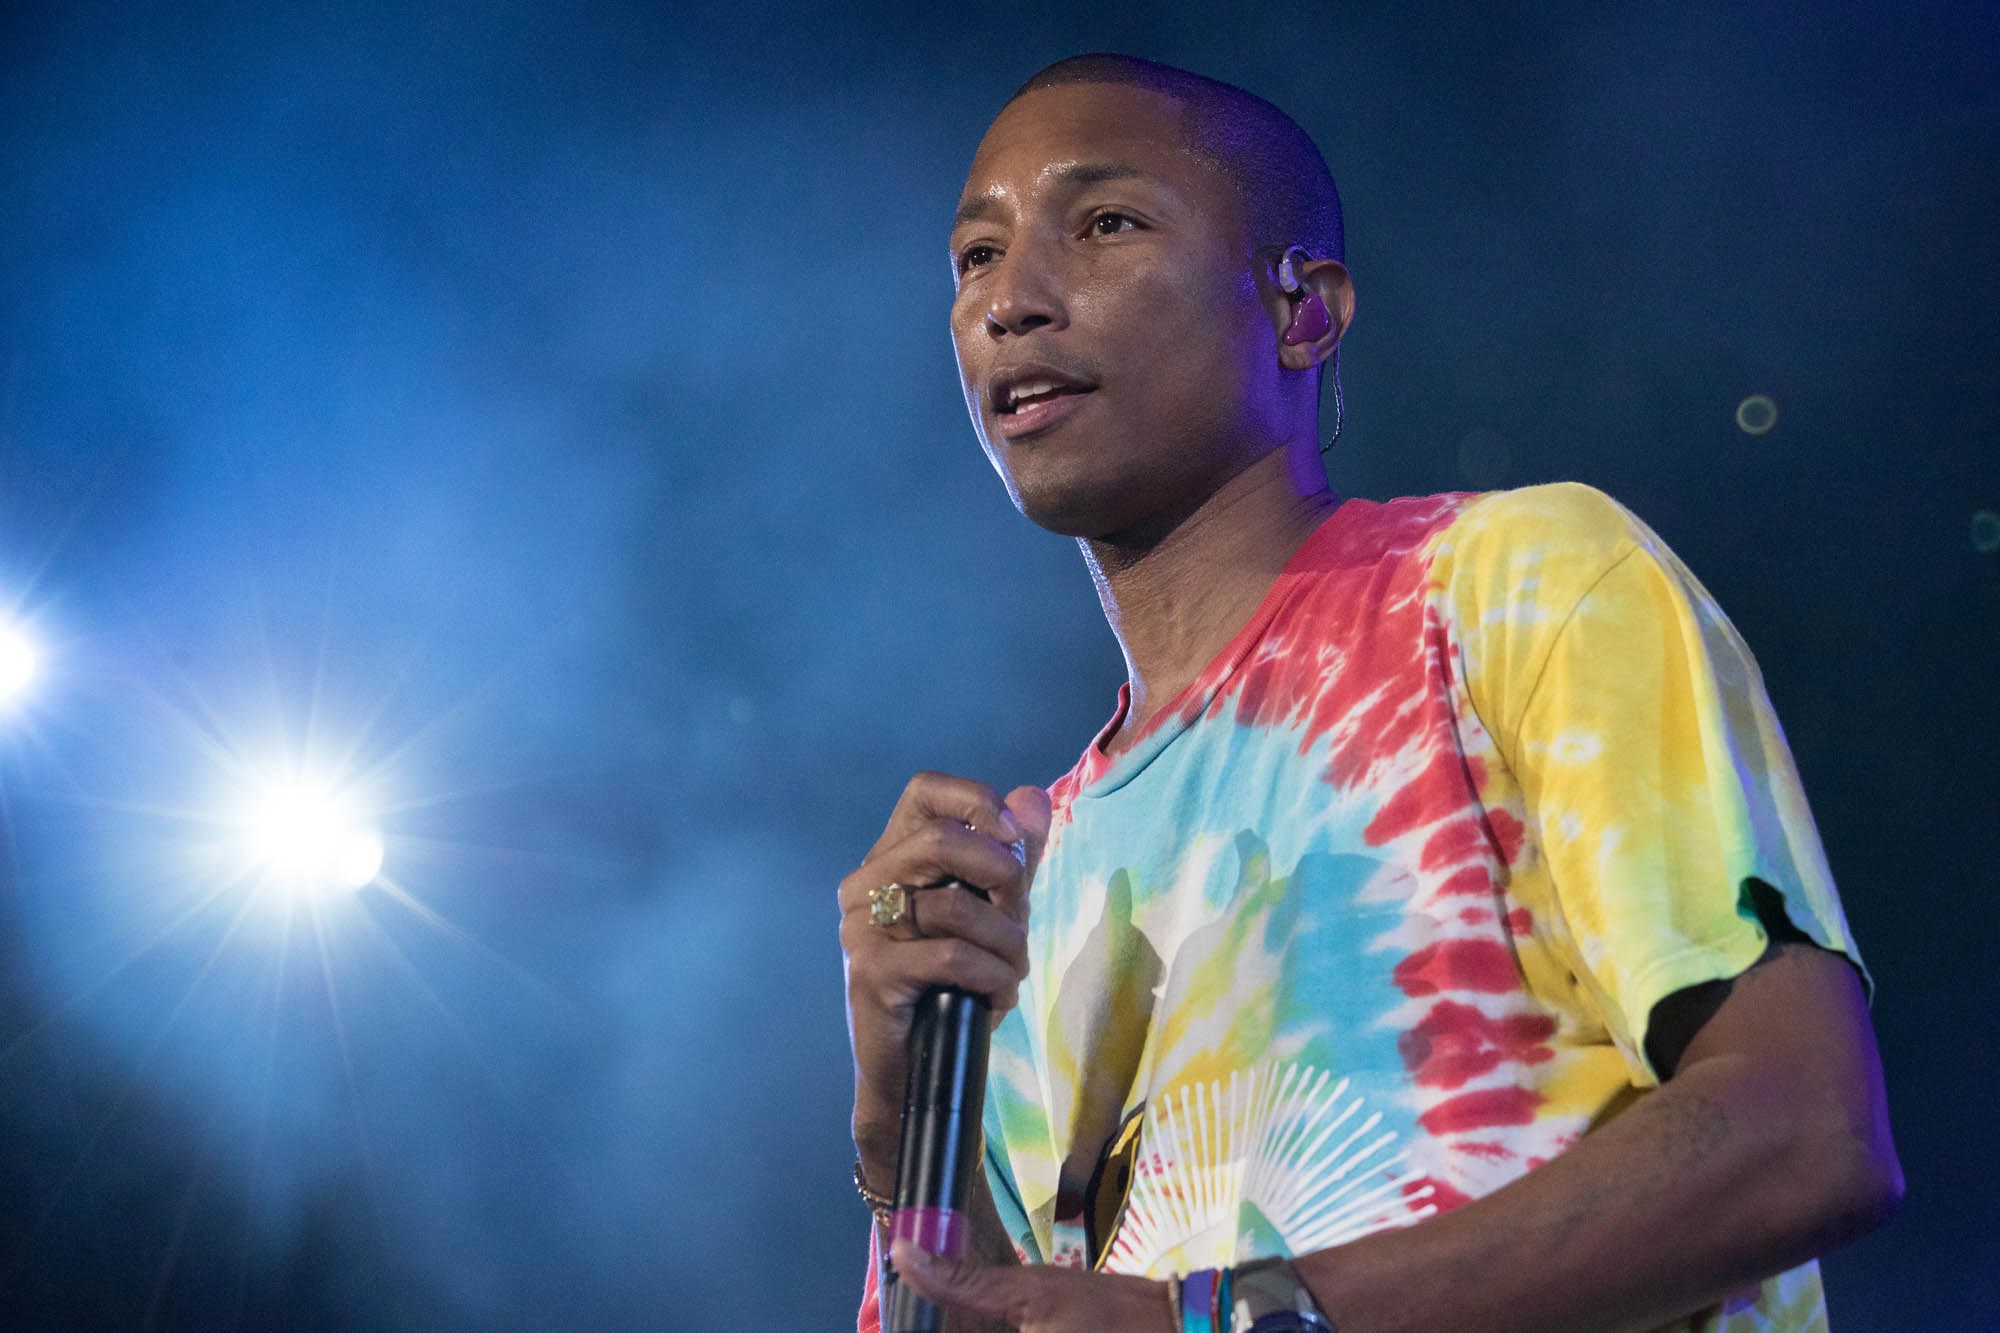 Pharrell Williams holding a microphone on stage